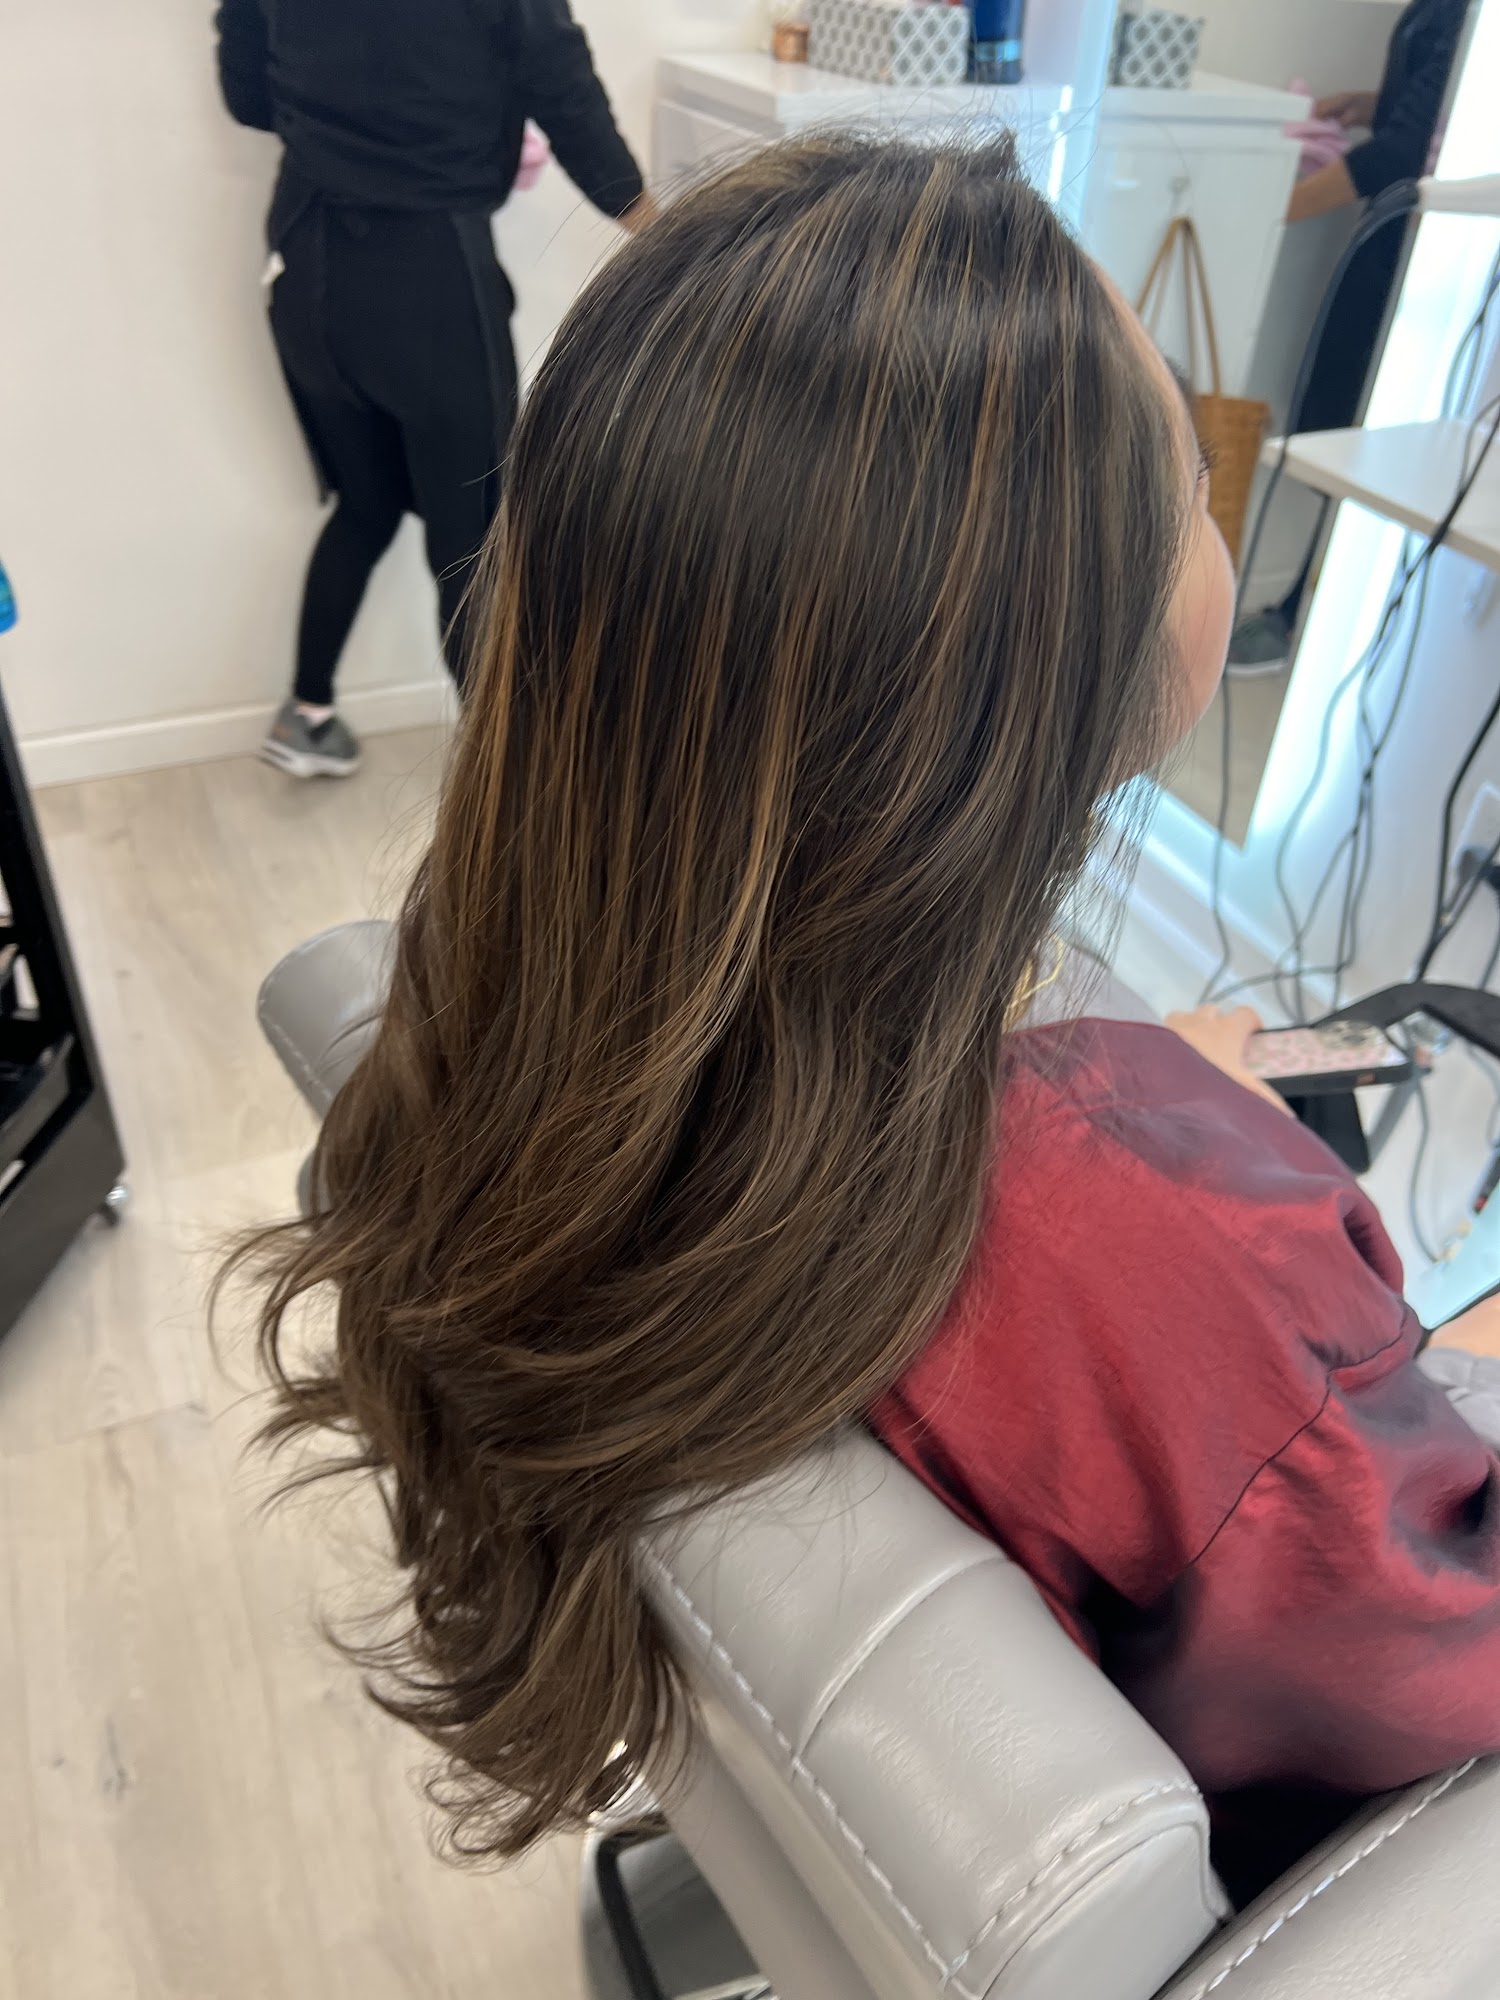 Salon Tai II - Beauty Salon, hair straightening perm and hair color, unisex haircut , Hairstyling, Ombre Hair Coloring Salon 2 Jericho Turnpike, Jericho New York 11753